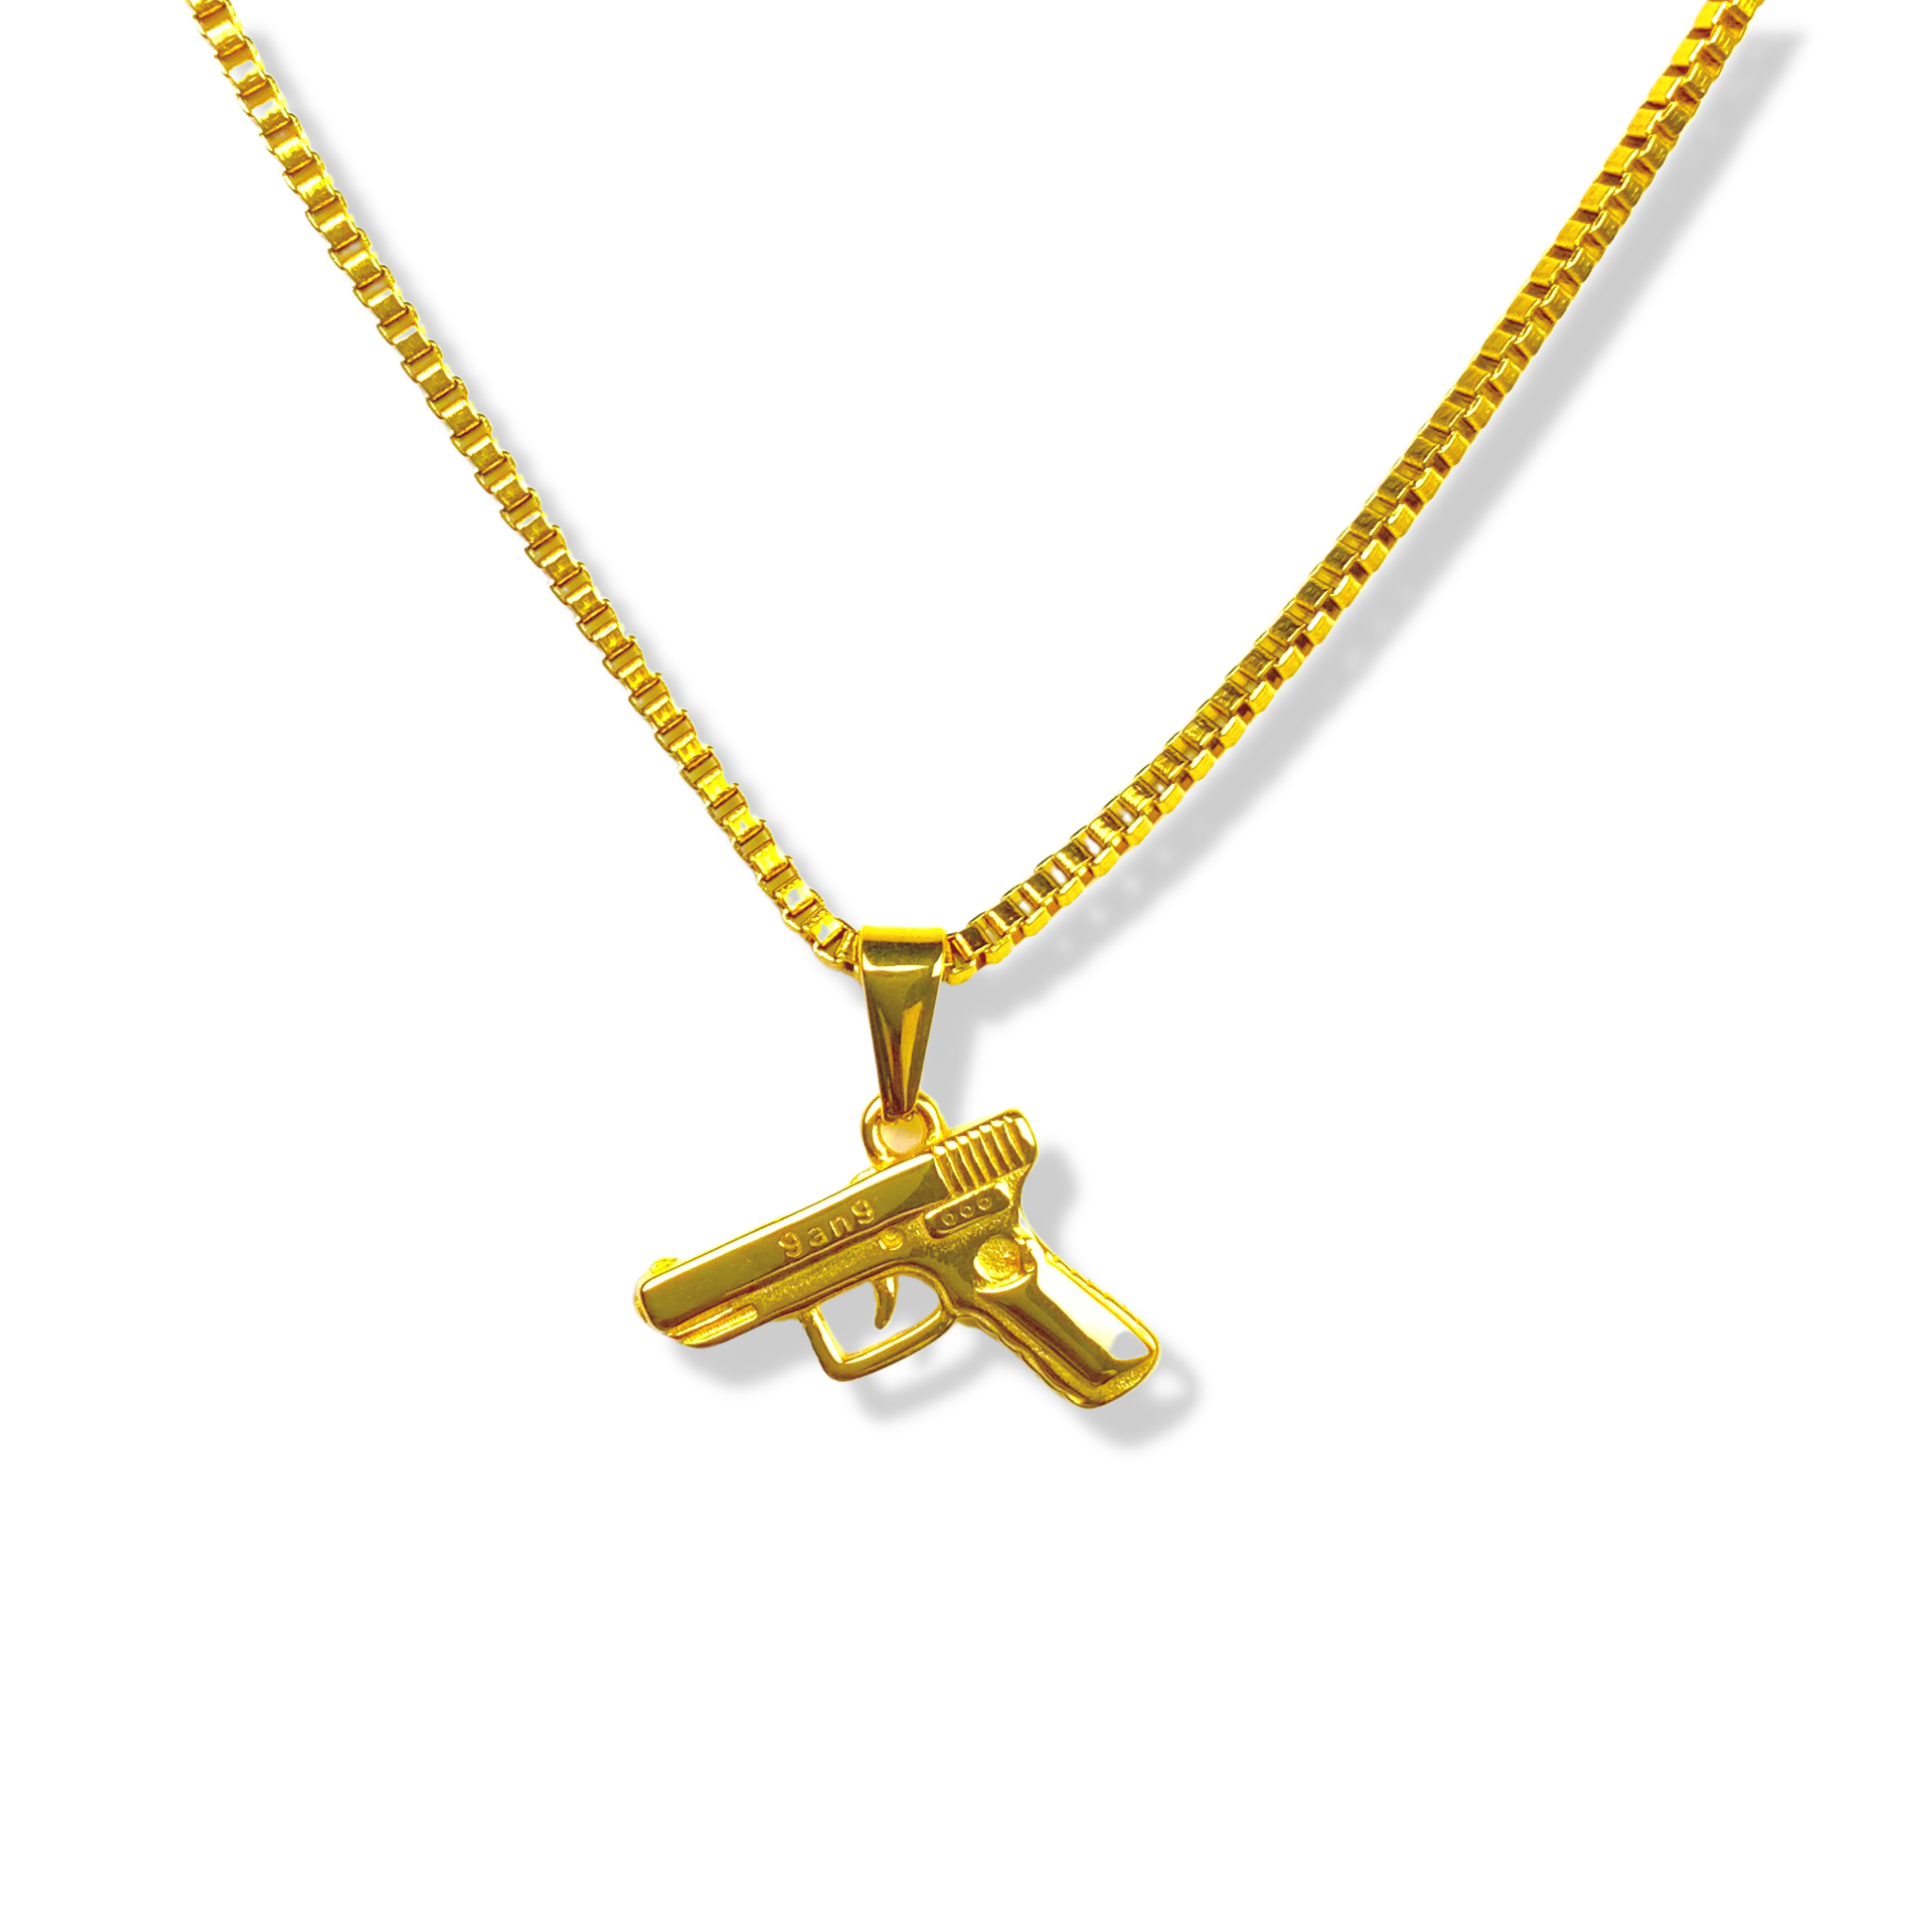 Girl Gang Necklace